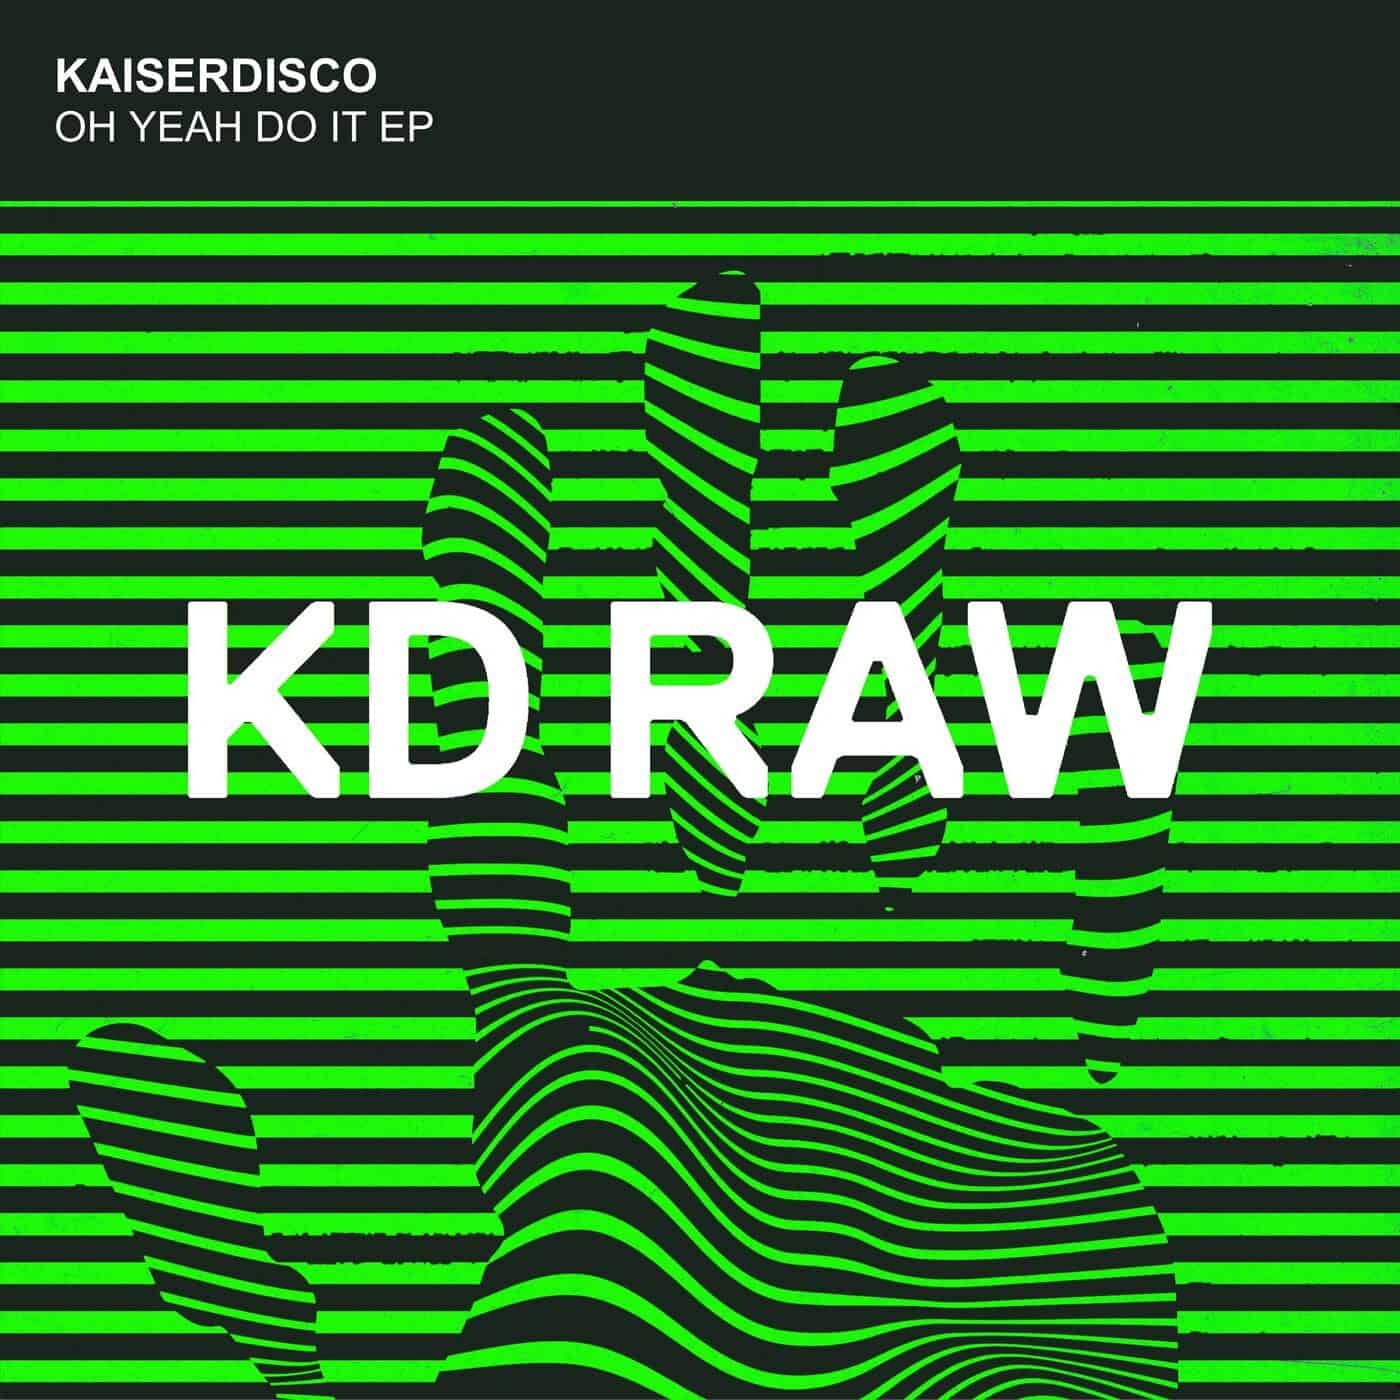 image cover: Kaiserdisco - Oh Yeah Do It EP / KDRAW090